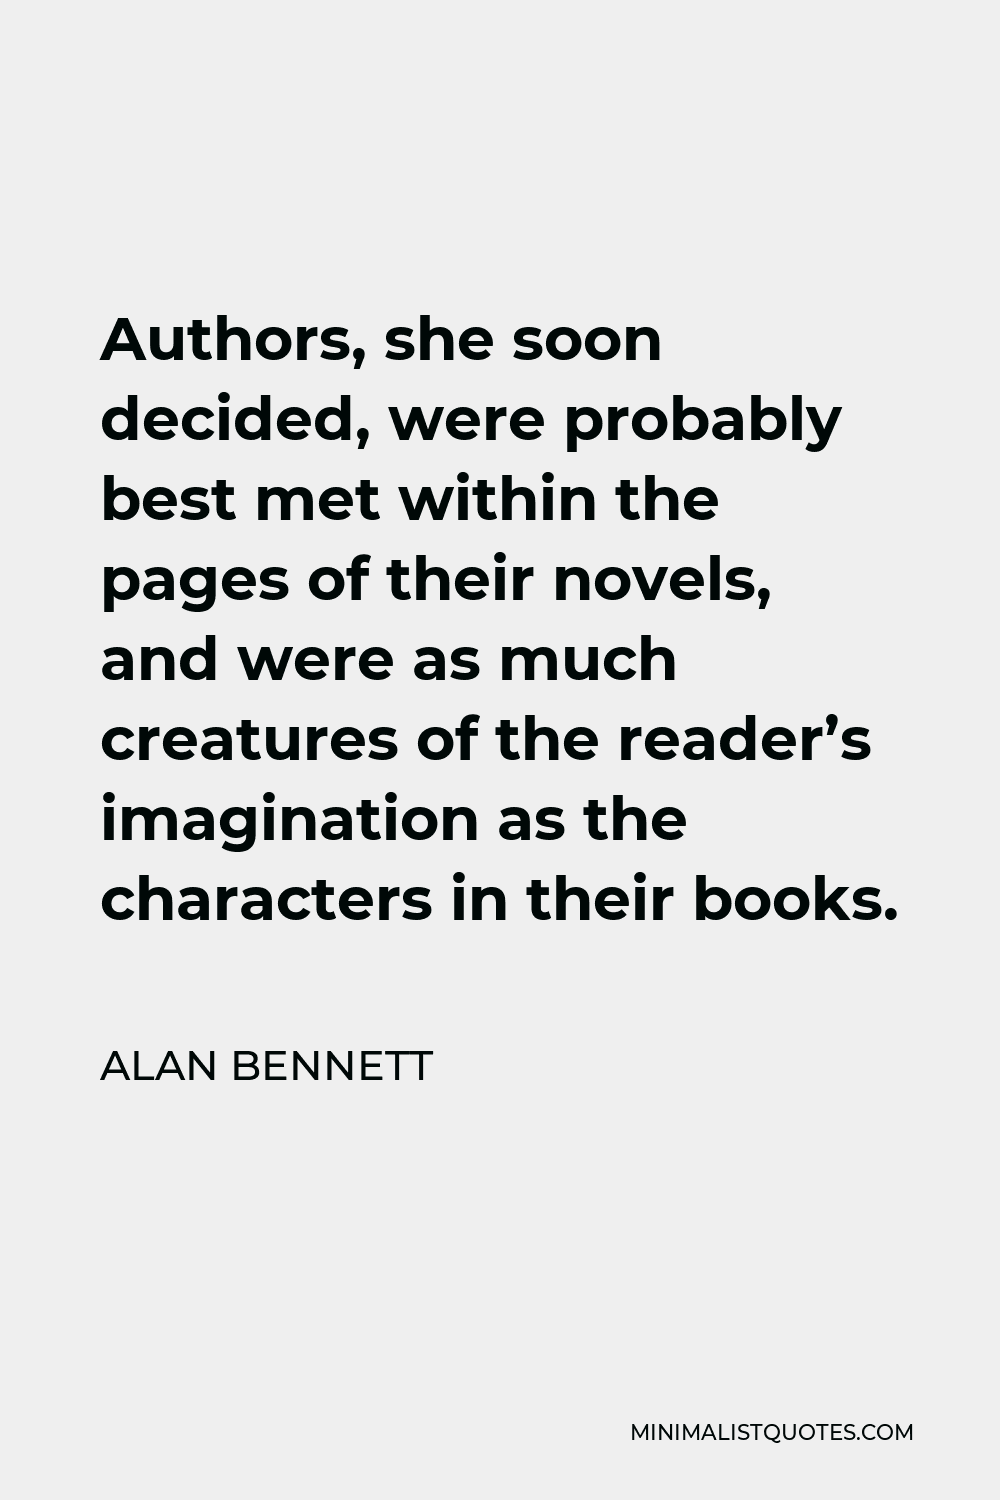 Alan Bennett Quote - Authors, she soon decided, were probably best met within the pages of their novels, and were as much creatures of the reader’s imagination as the characters in their books.